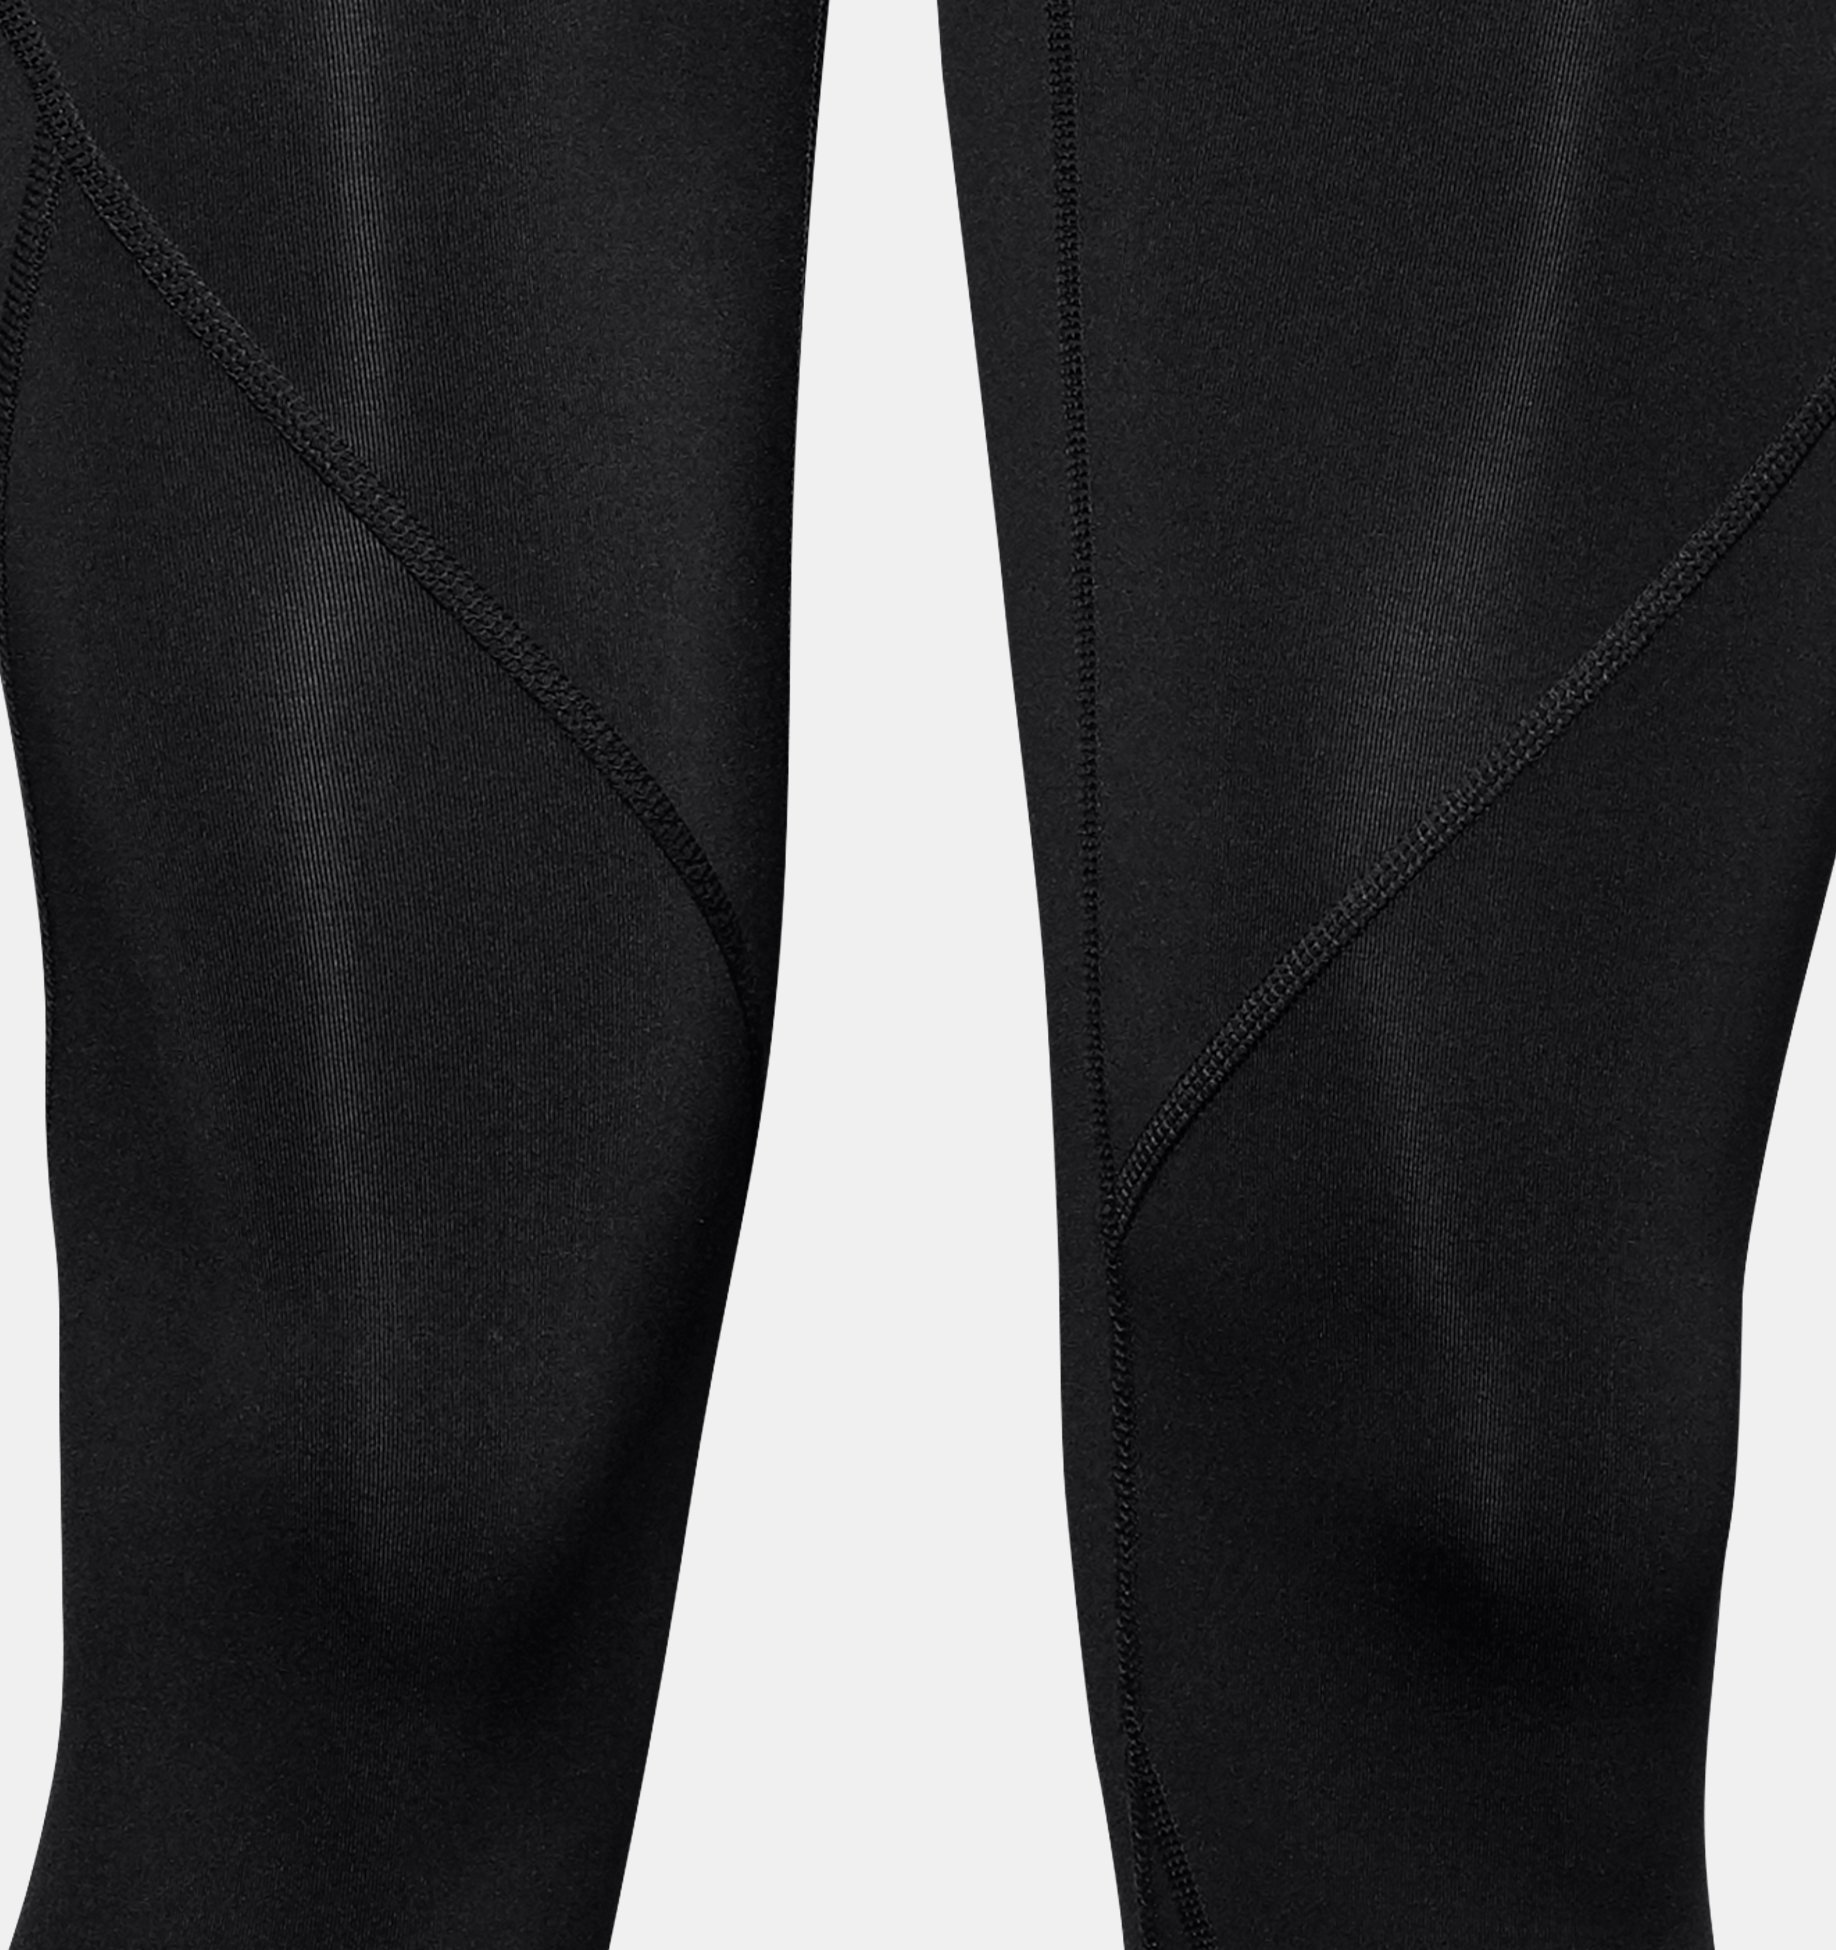 syndroom Ooit sarcoom Women's UA RUSH™ Leggings | Under Armour